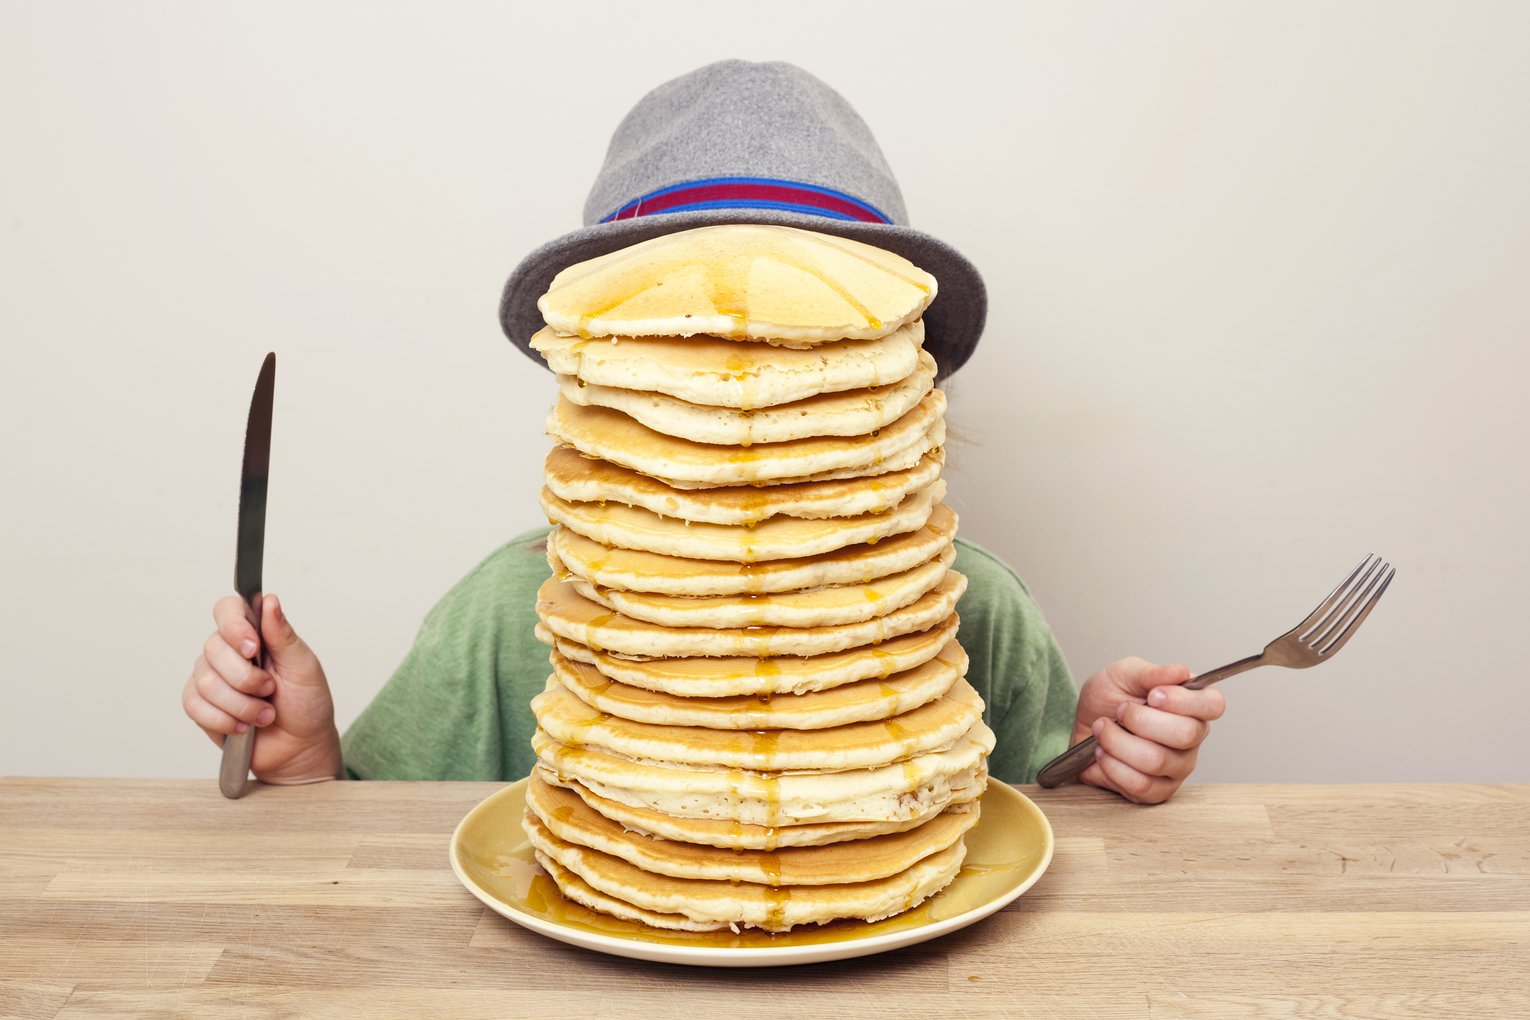 Free pancakes at IHOP - March 1.